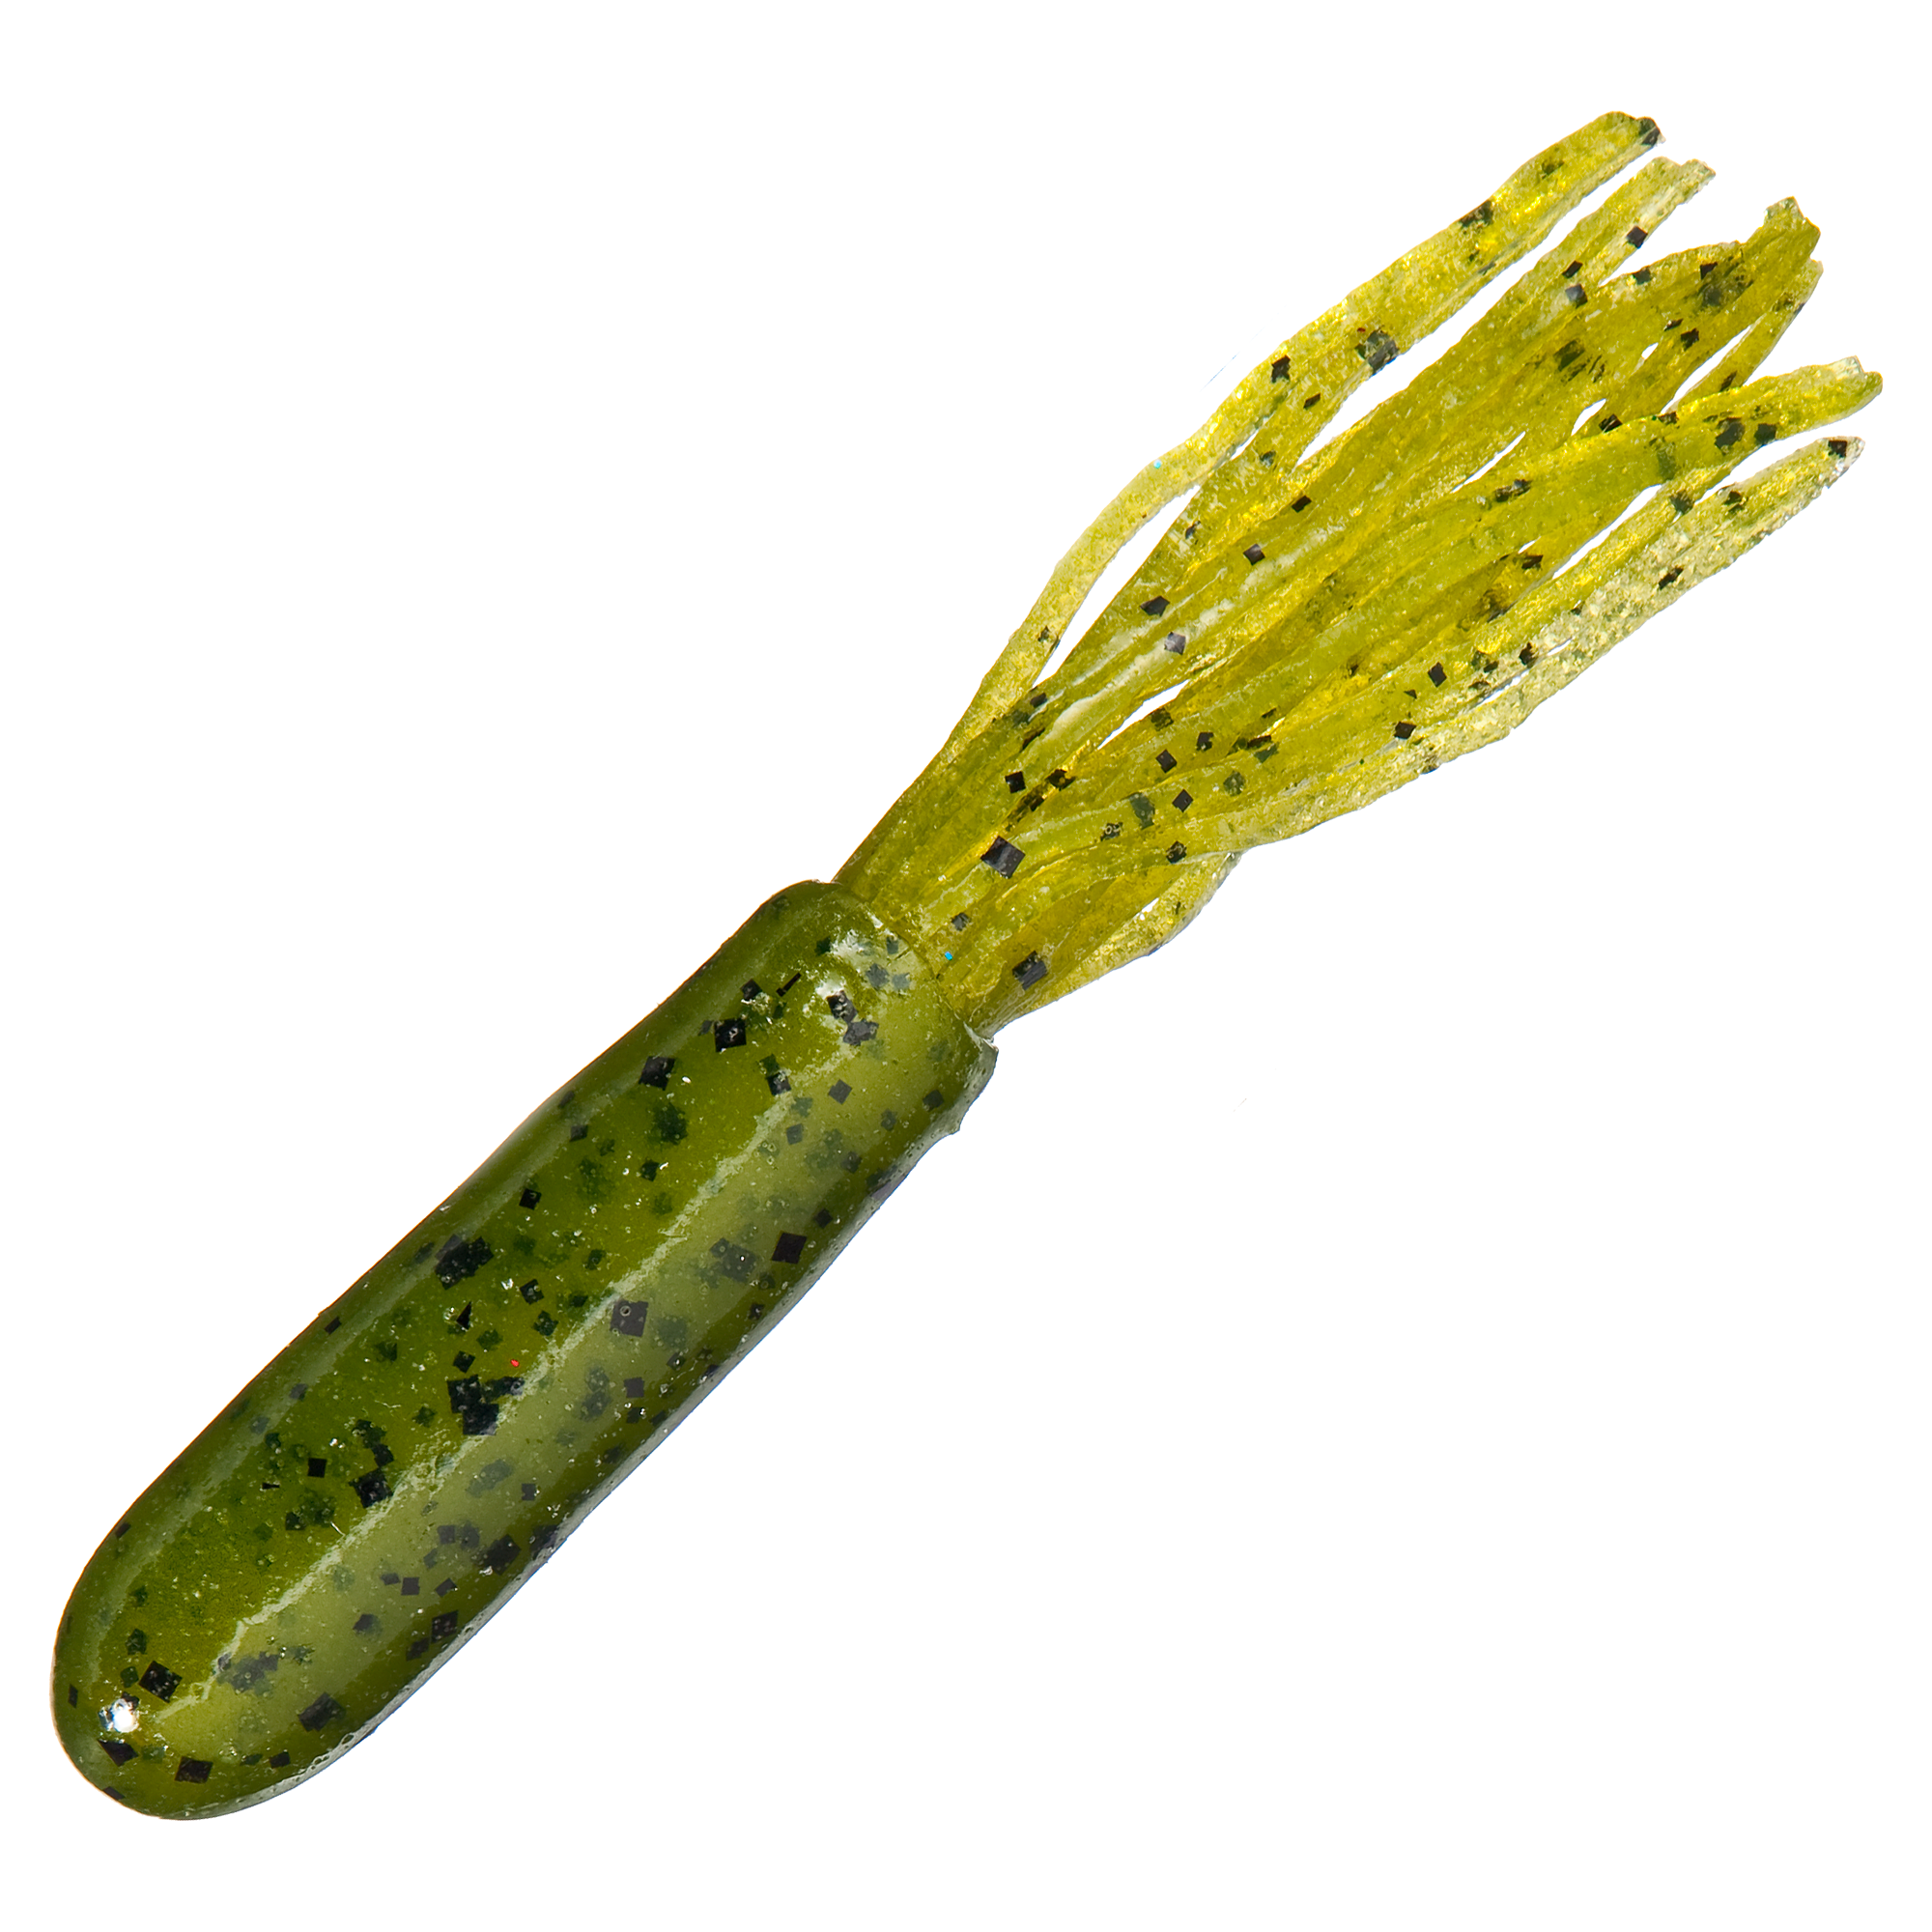 ZOOM Salty Super Tube Flip Pitch Bait Soft Plastic Lure 3.75 8ct CHRISTMAS  TREE 